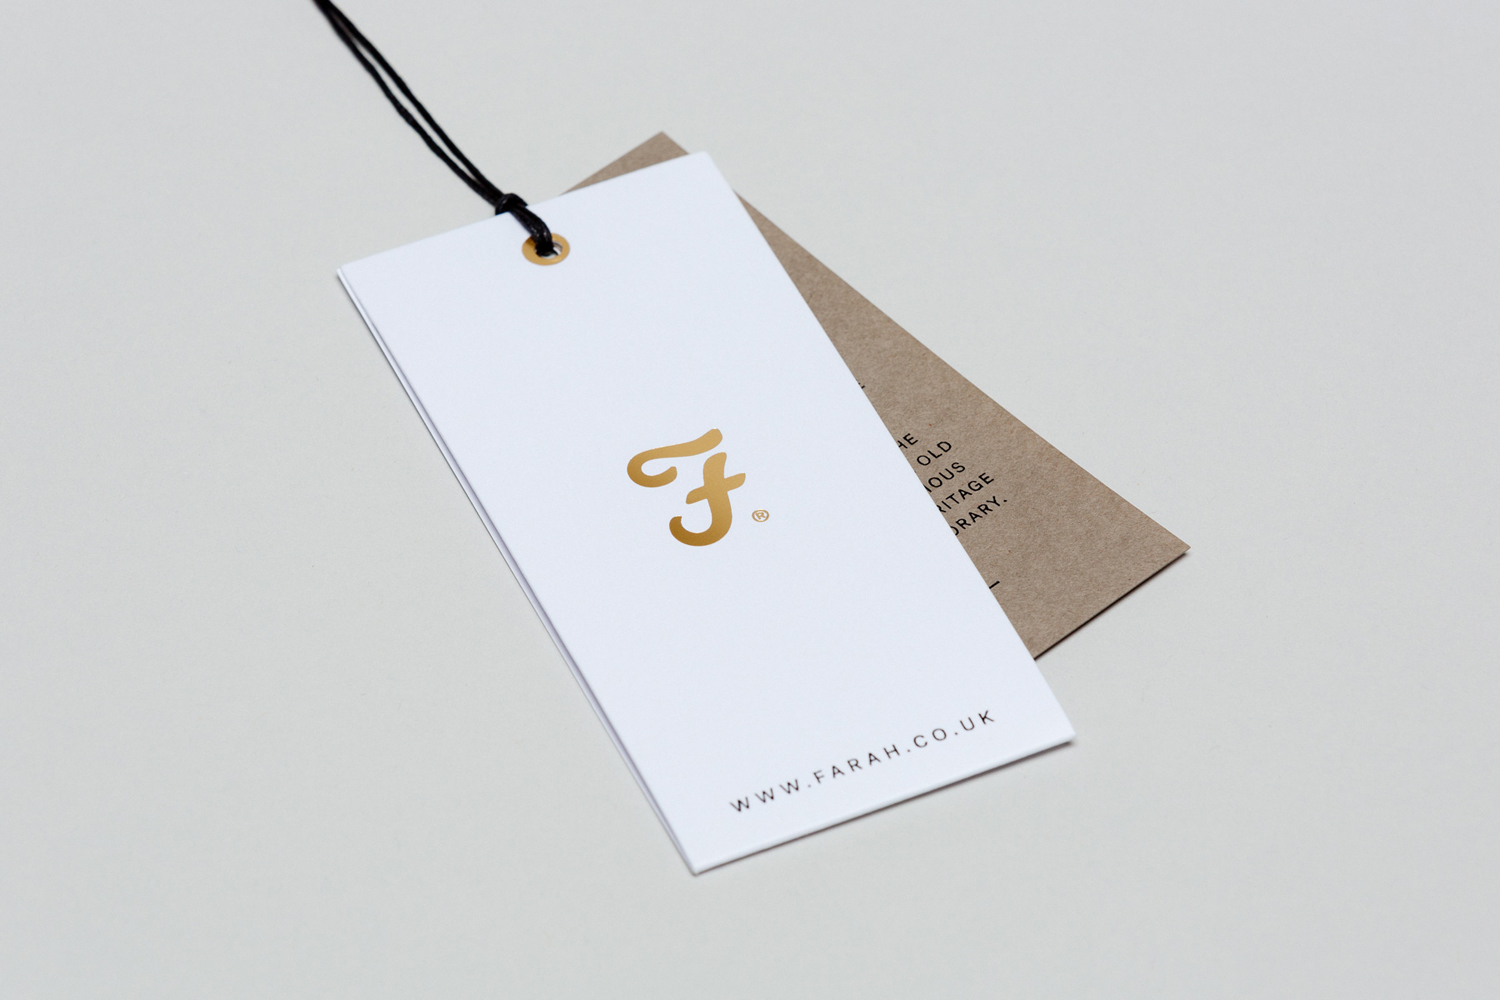 Brand identity and gold block foil clothing tag for British fashion brand Farah by graphic design studio Post